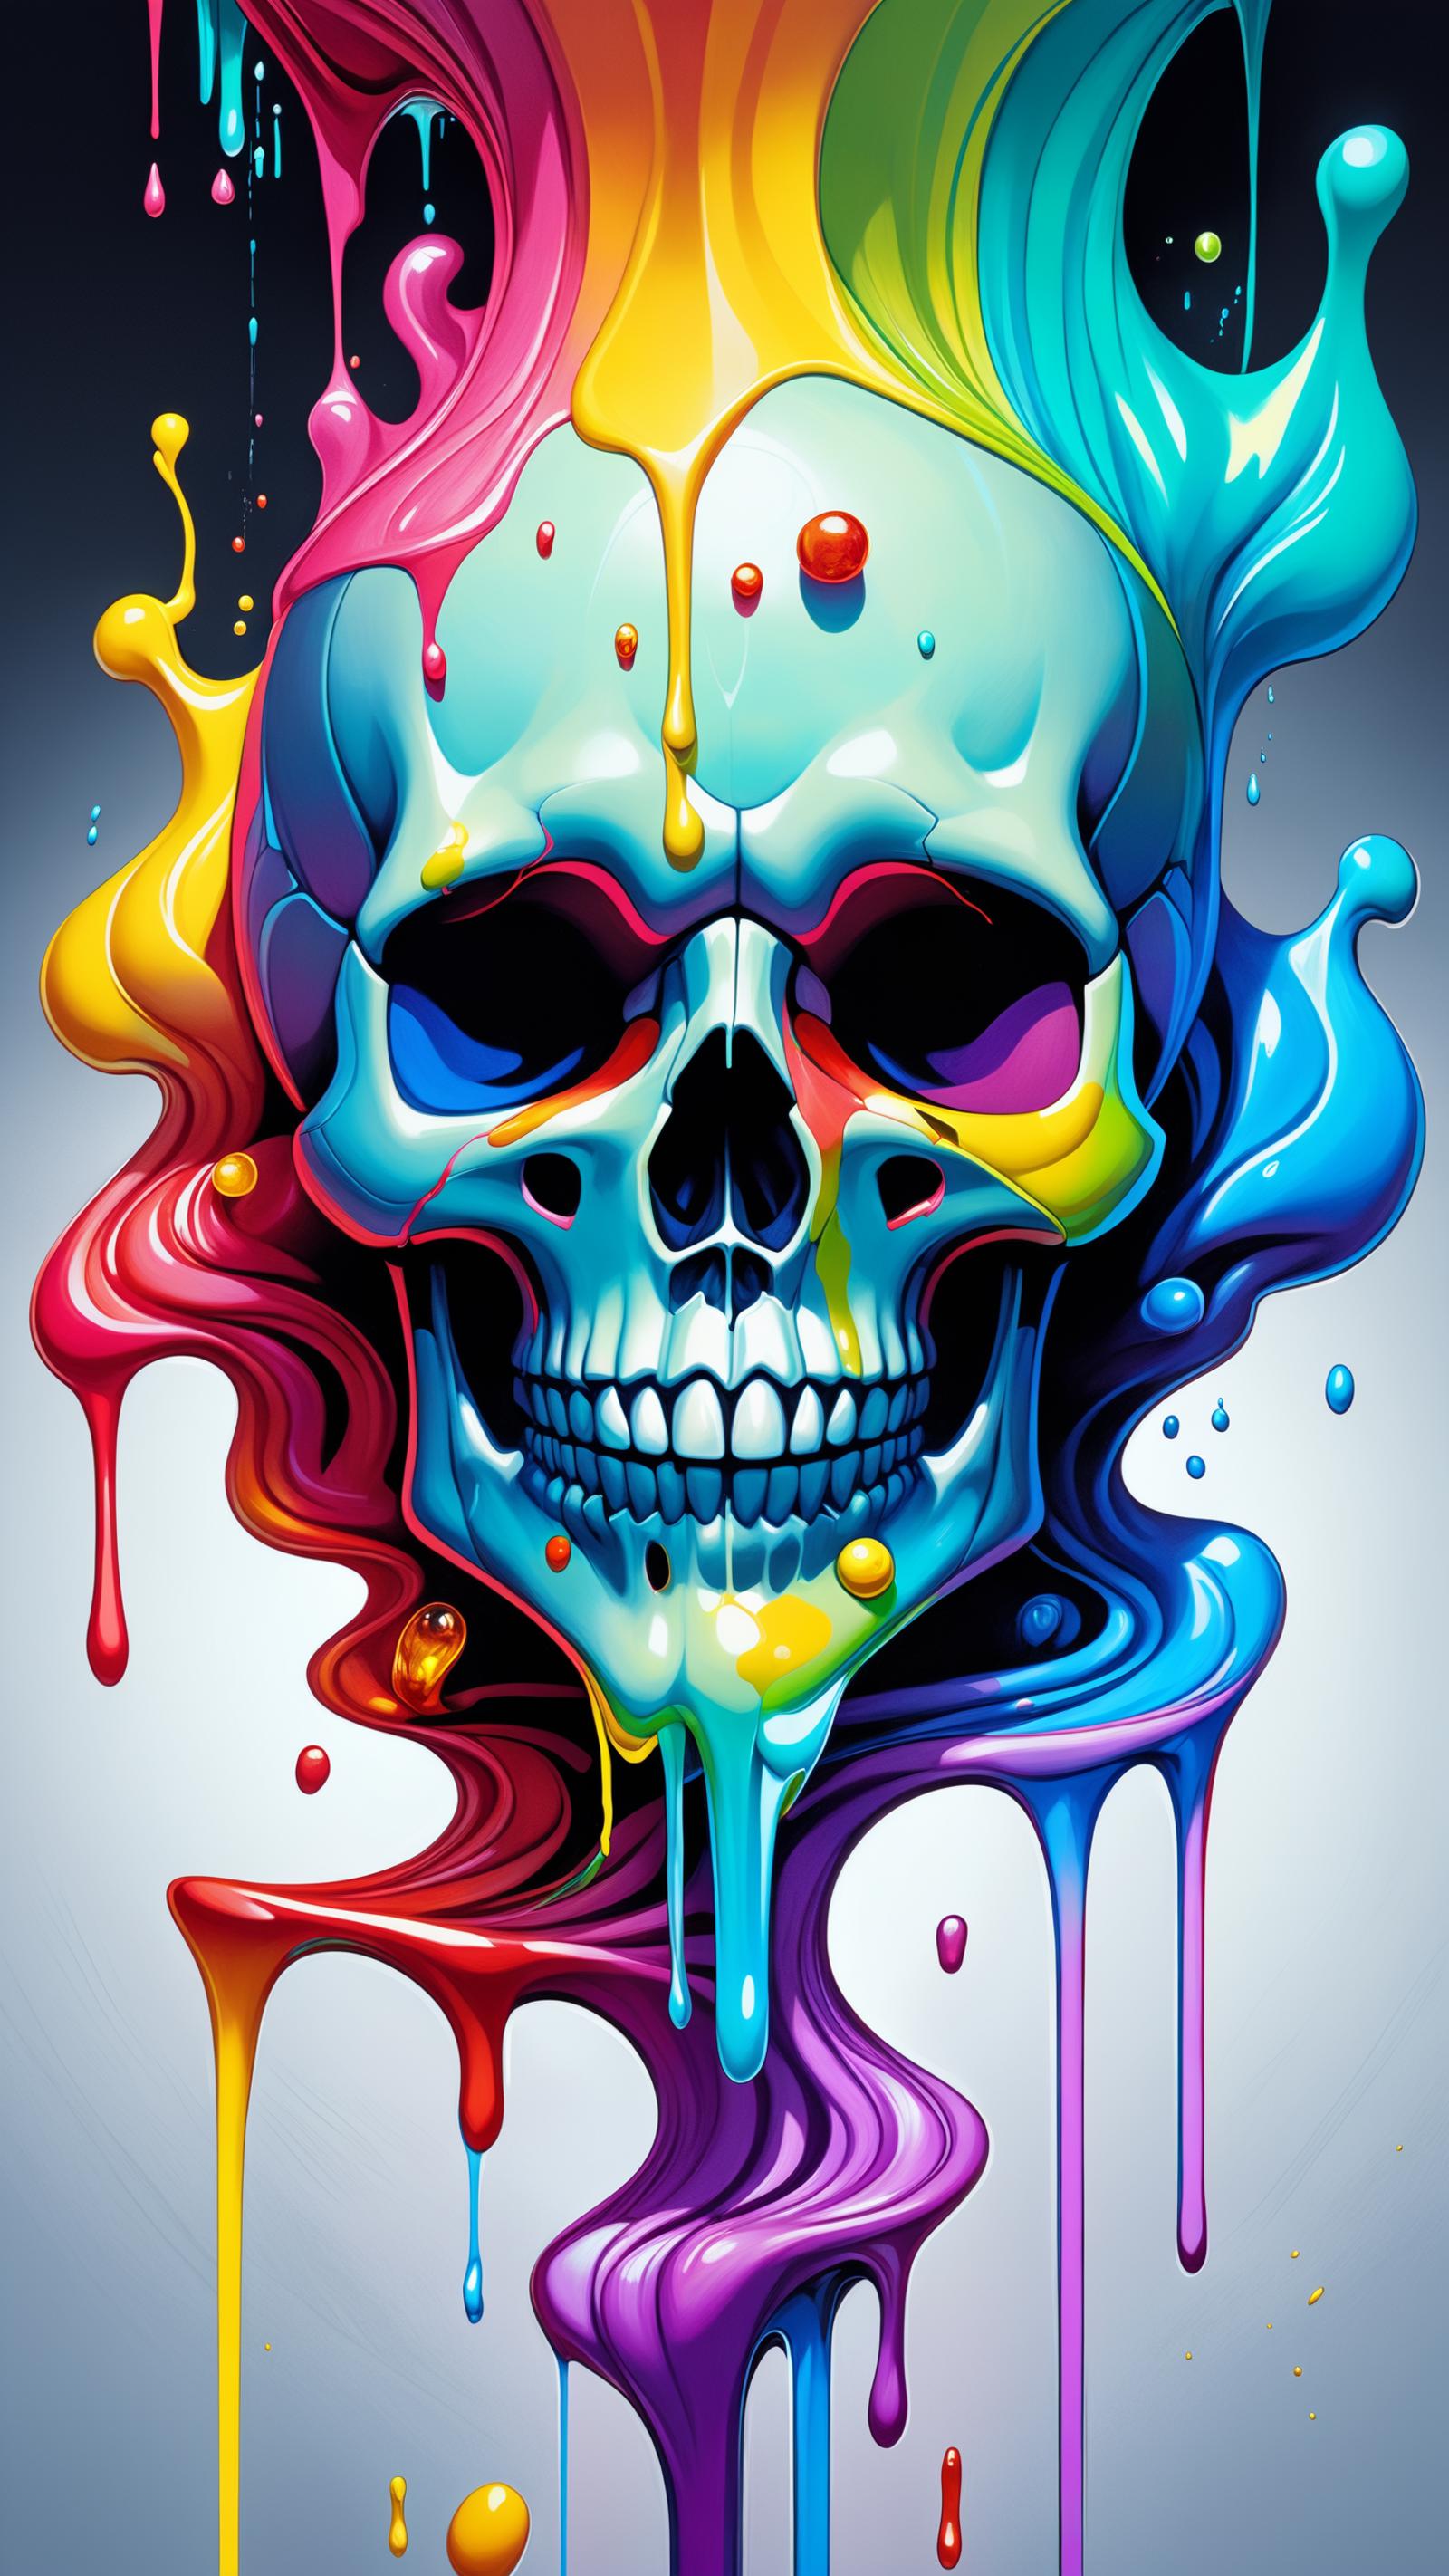 Colorful, Rainbow-Painted Skull with Yellow, Red, Green, Blue, and Purple Paint Splatters